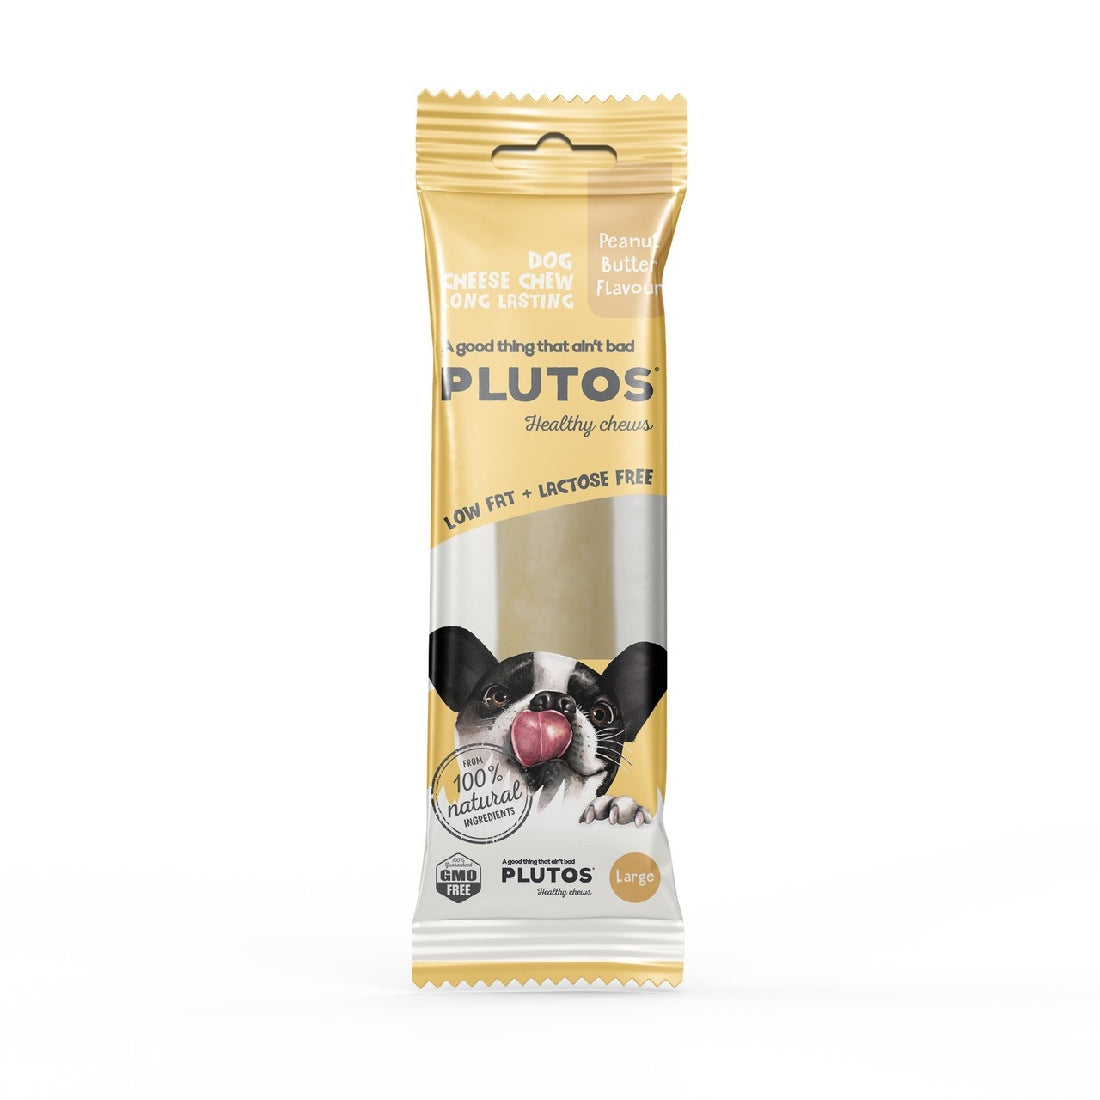 PLUTOS CHEESE & PEANUT BUTTER LARGE